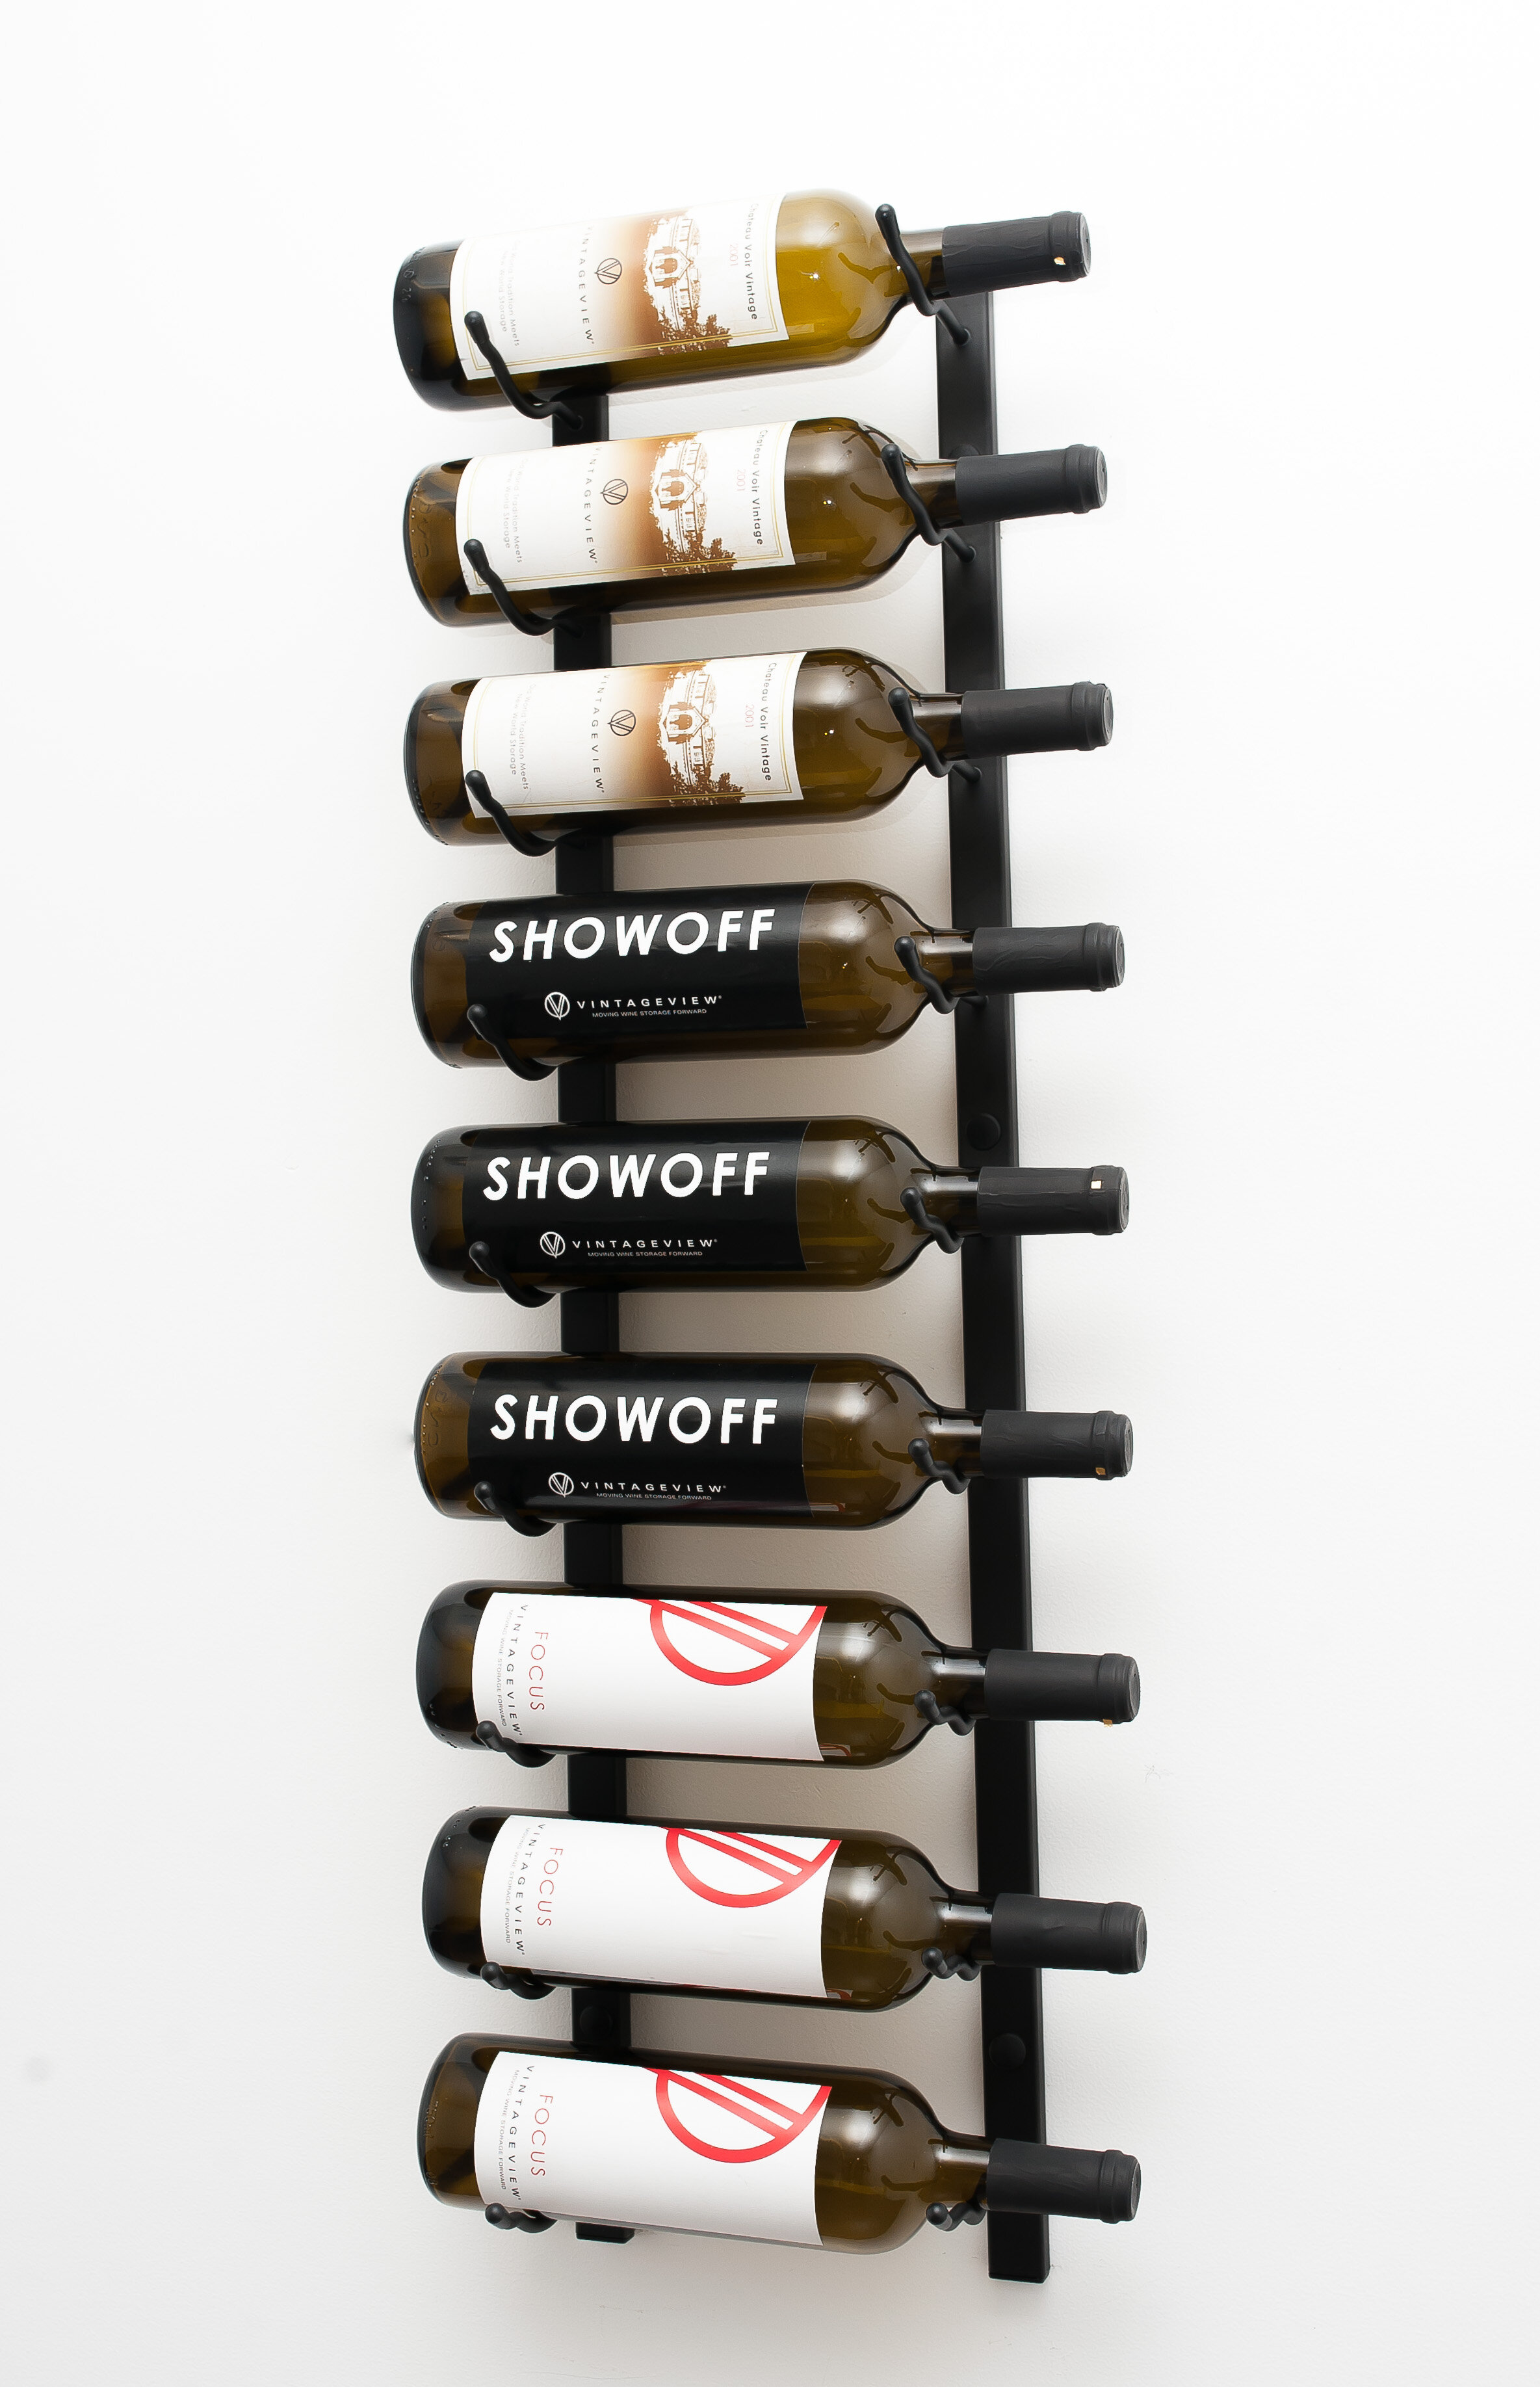 21 Bottle Wall Mounted Wine Bottle Rack VintageView Wall Series Stylish Modern Wine Storage with Label Forward Design Satin Black 